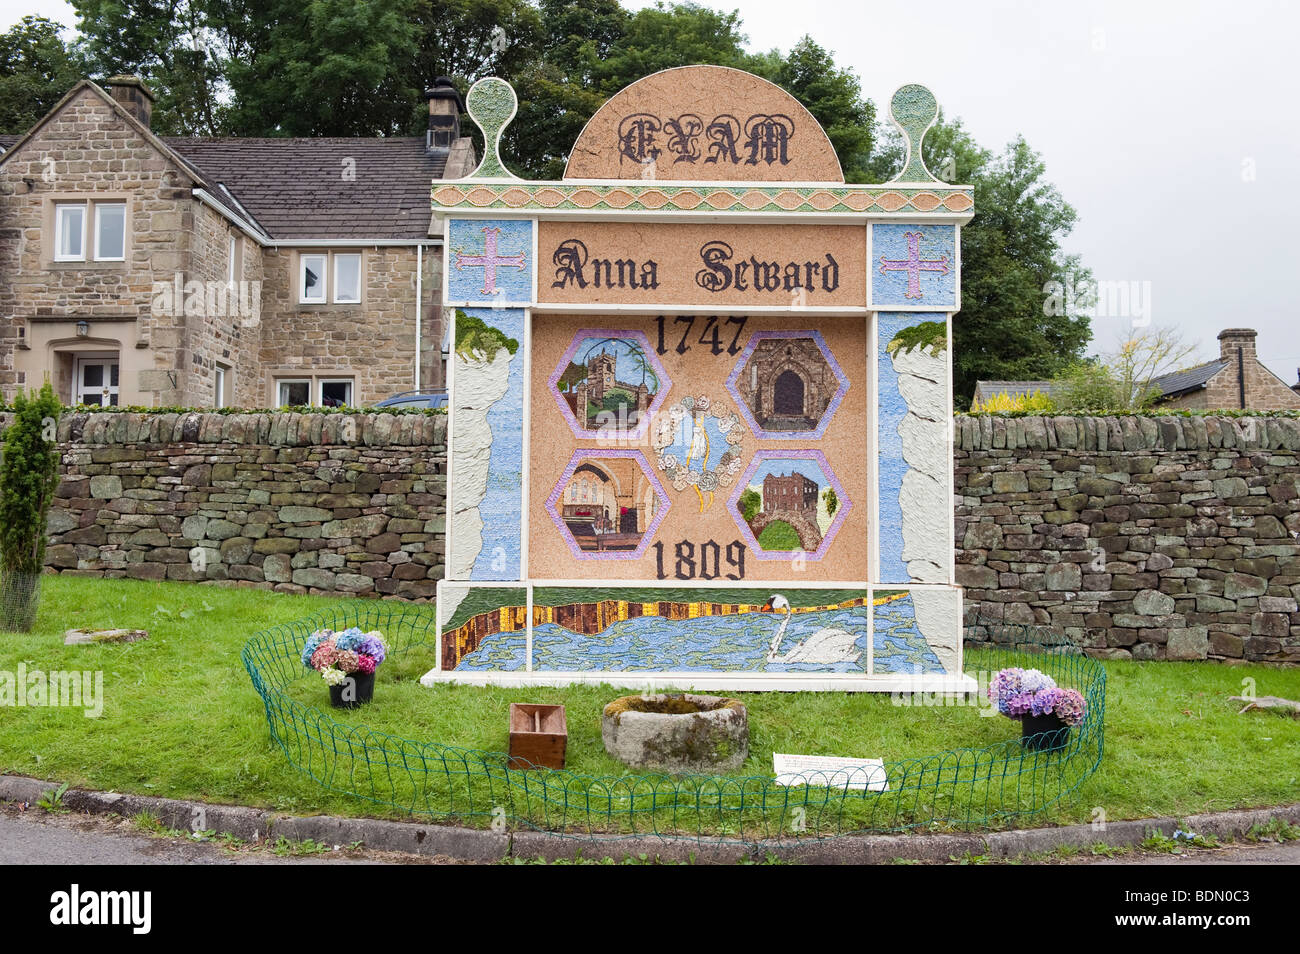 2009 'Well Dressing' in Eyam, 'Peak District' ,Derbyshire,England Stock Photo